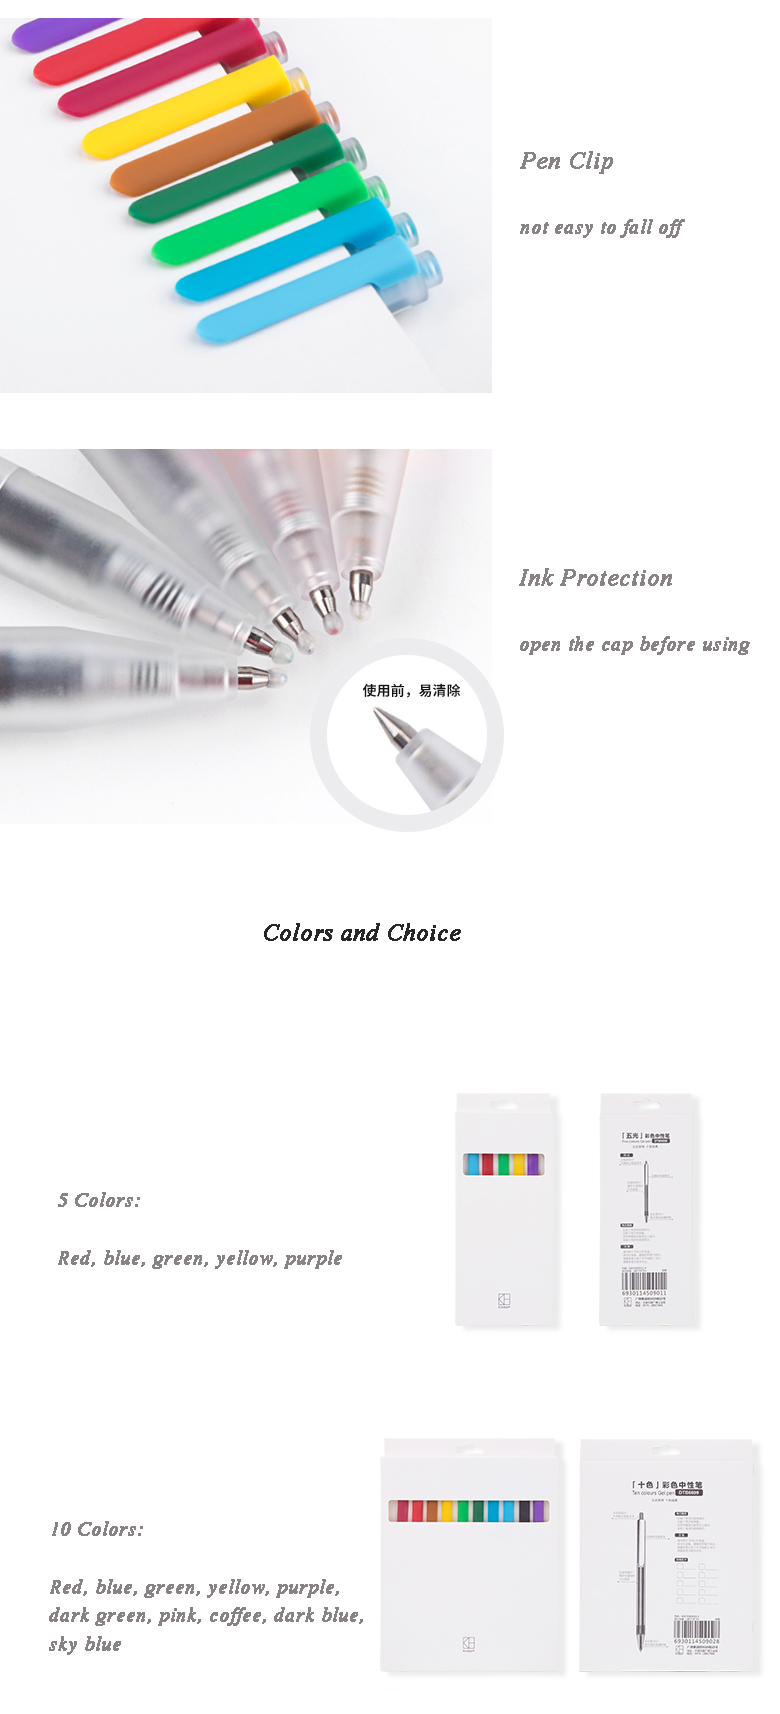 Kinbor-DTB6698-510-Colors-Colorful-Press-Gel-Pens-05mm-Frosted-Barrel-Drawing-Writing-Pen-Office-Sch-1538404-2